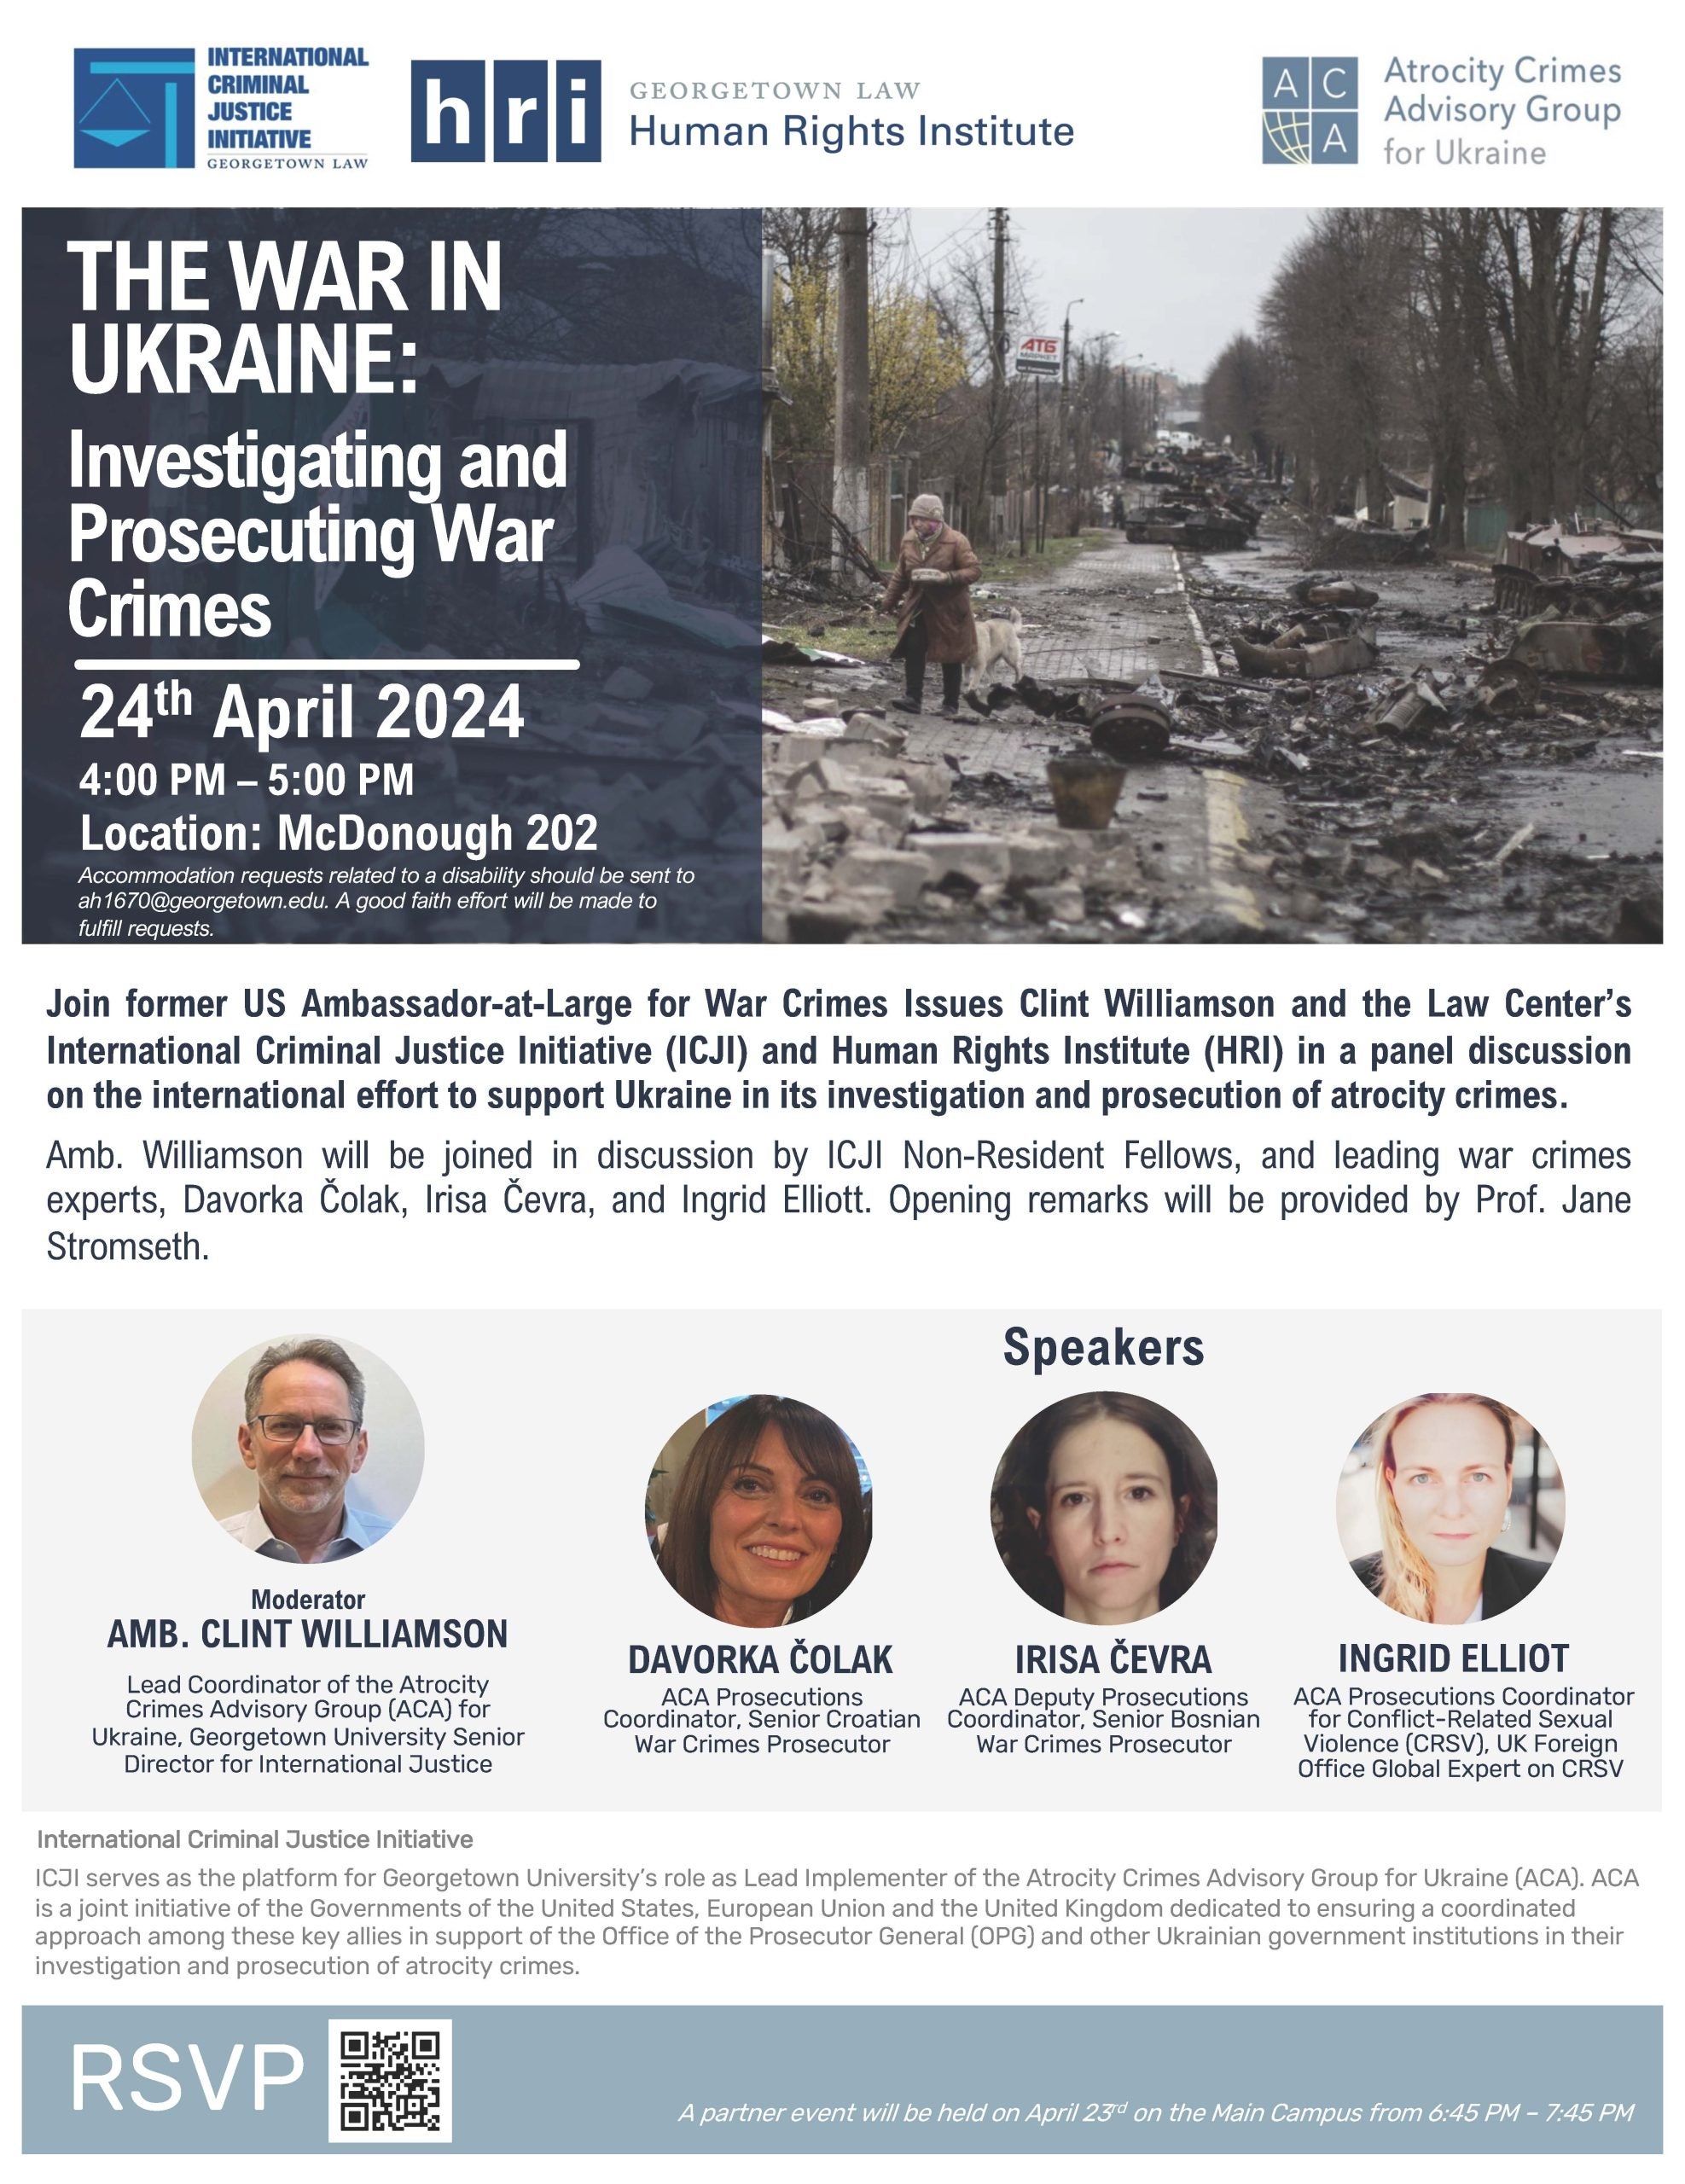 Event Flyer for "The War In Ukraine Investigative and Prosecutorial Strategies in Practice" Session